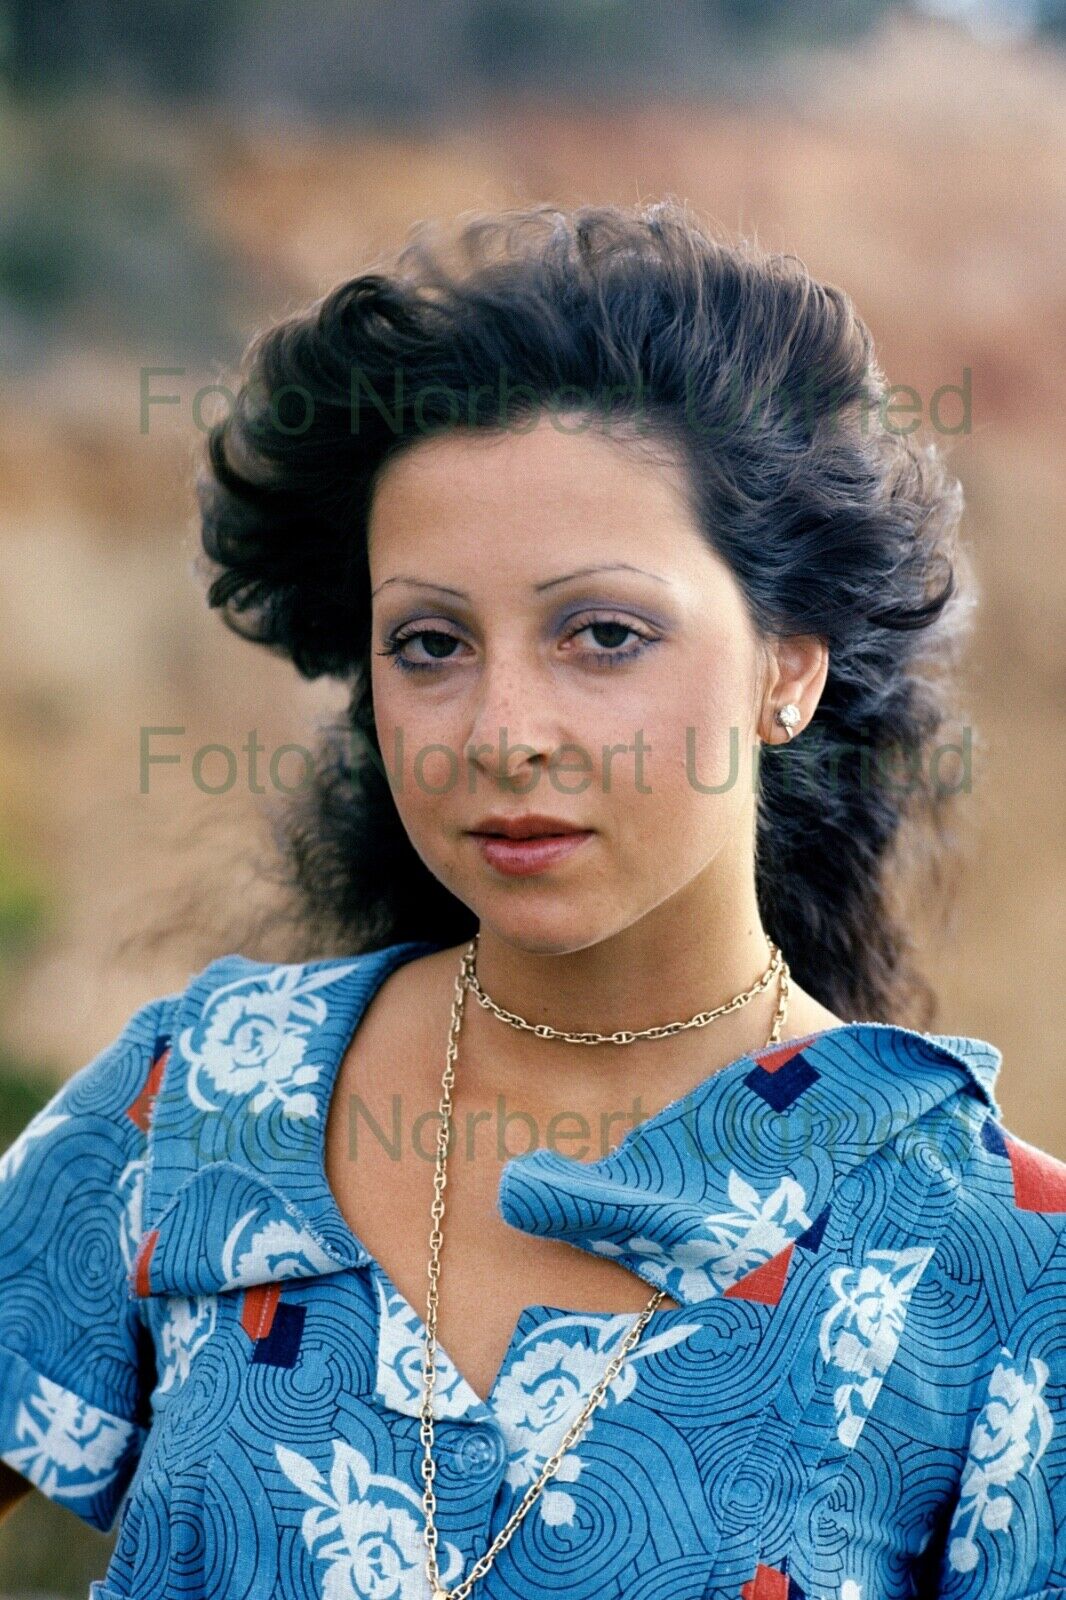 Vicky Leandros - Schlager Musik - Foto 20 x 30 cm ohne Autogramm (Nr 2-93